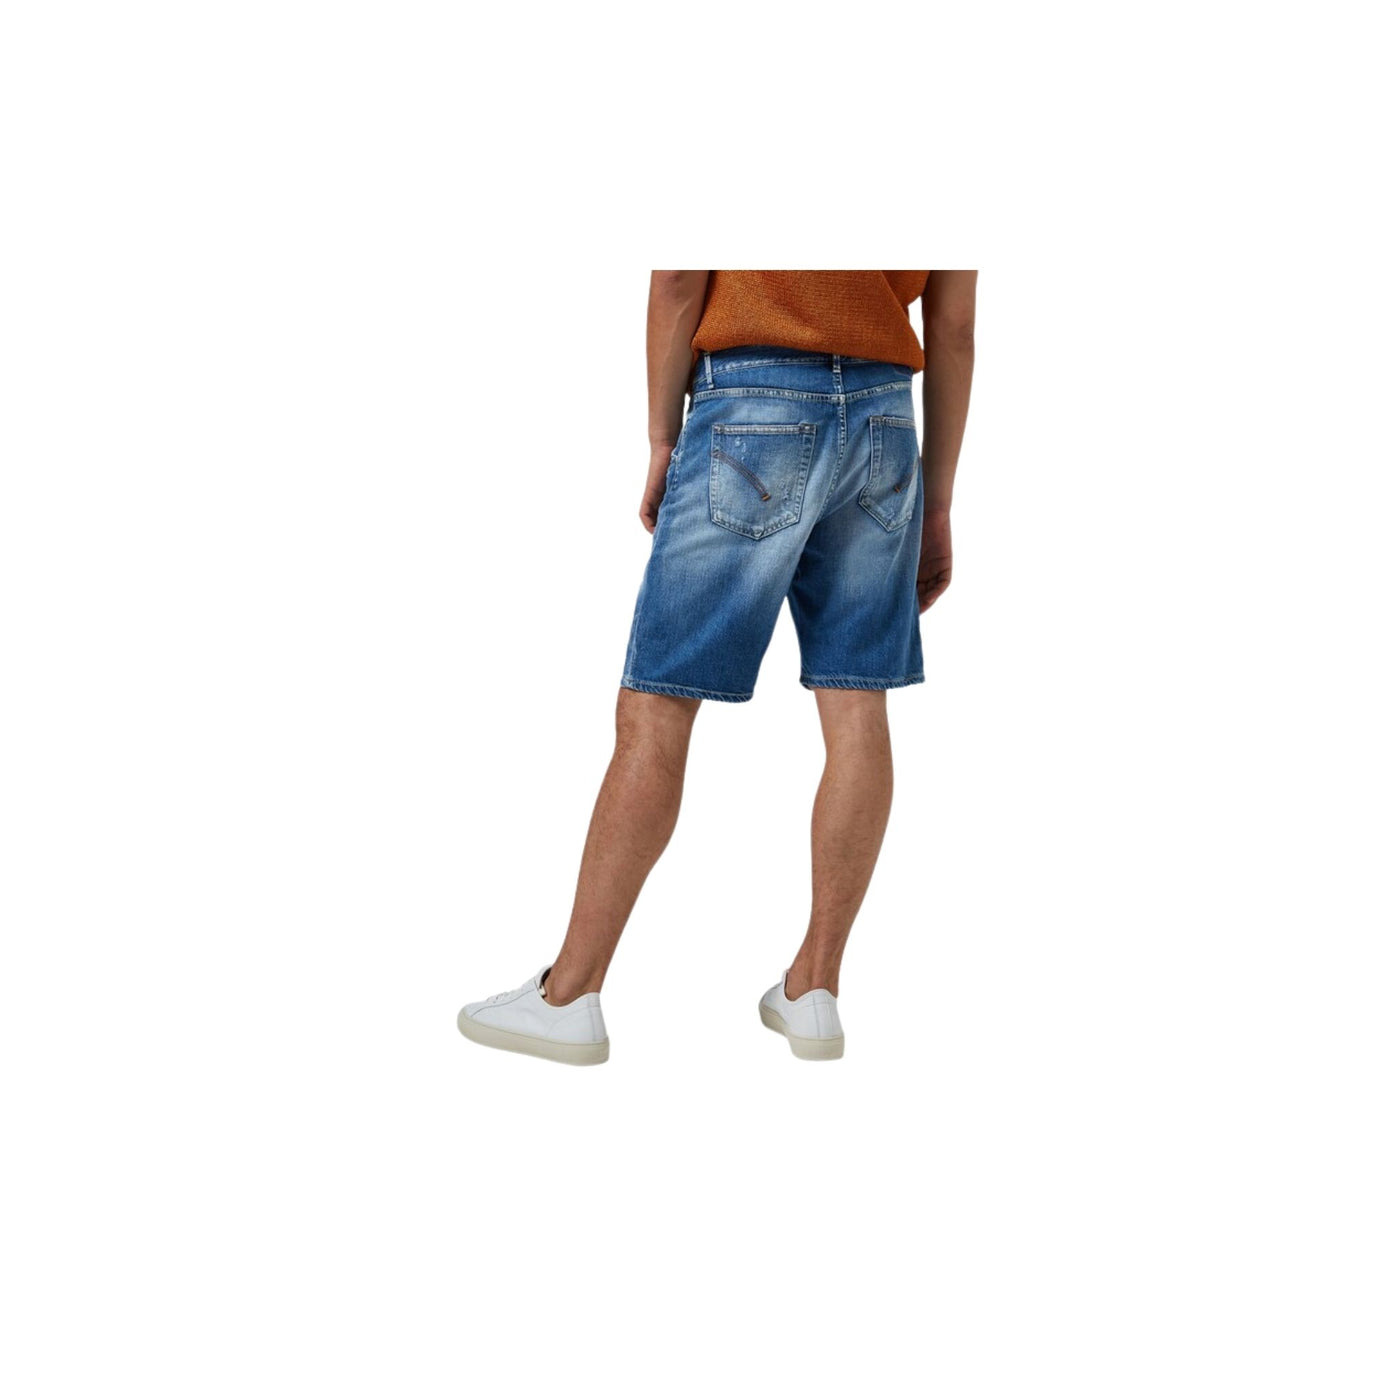 Men's bermuda with rips and side pockets